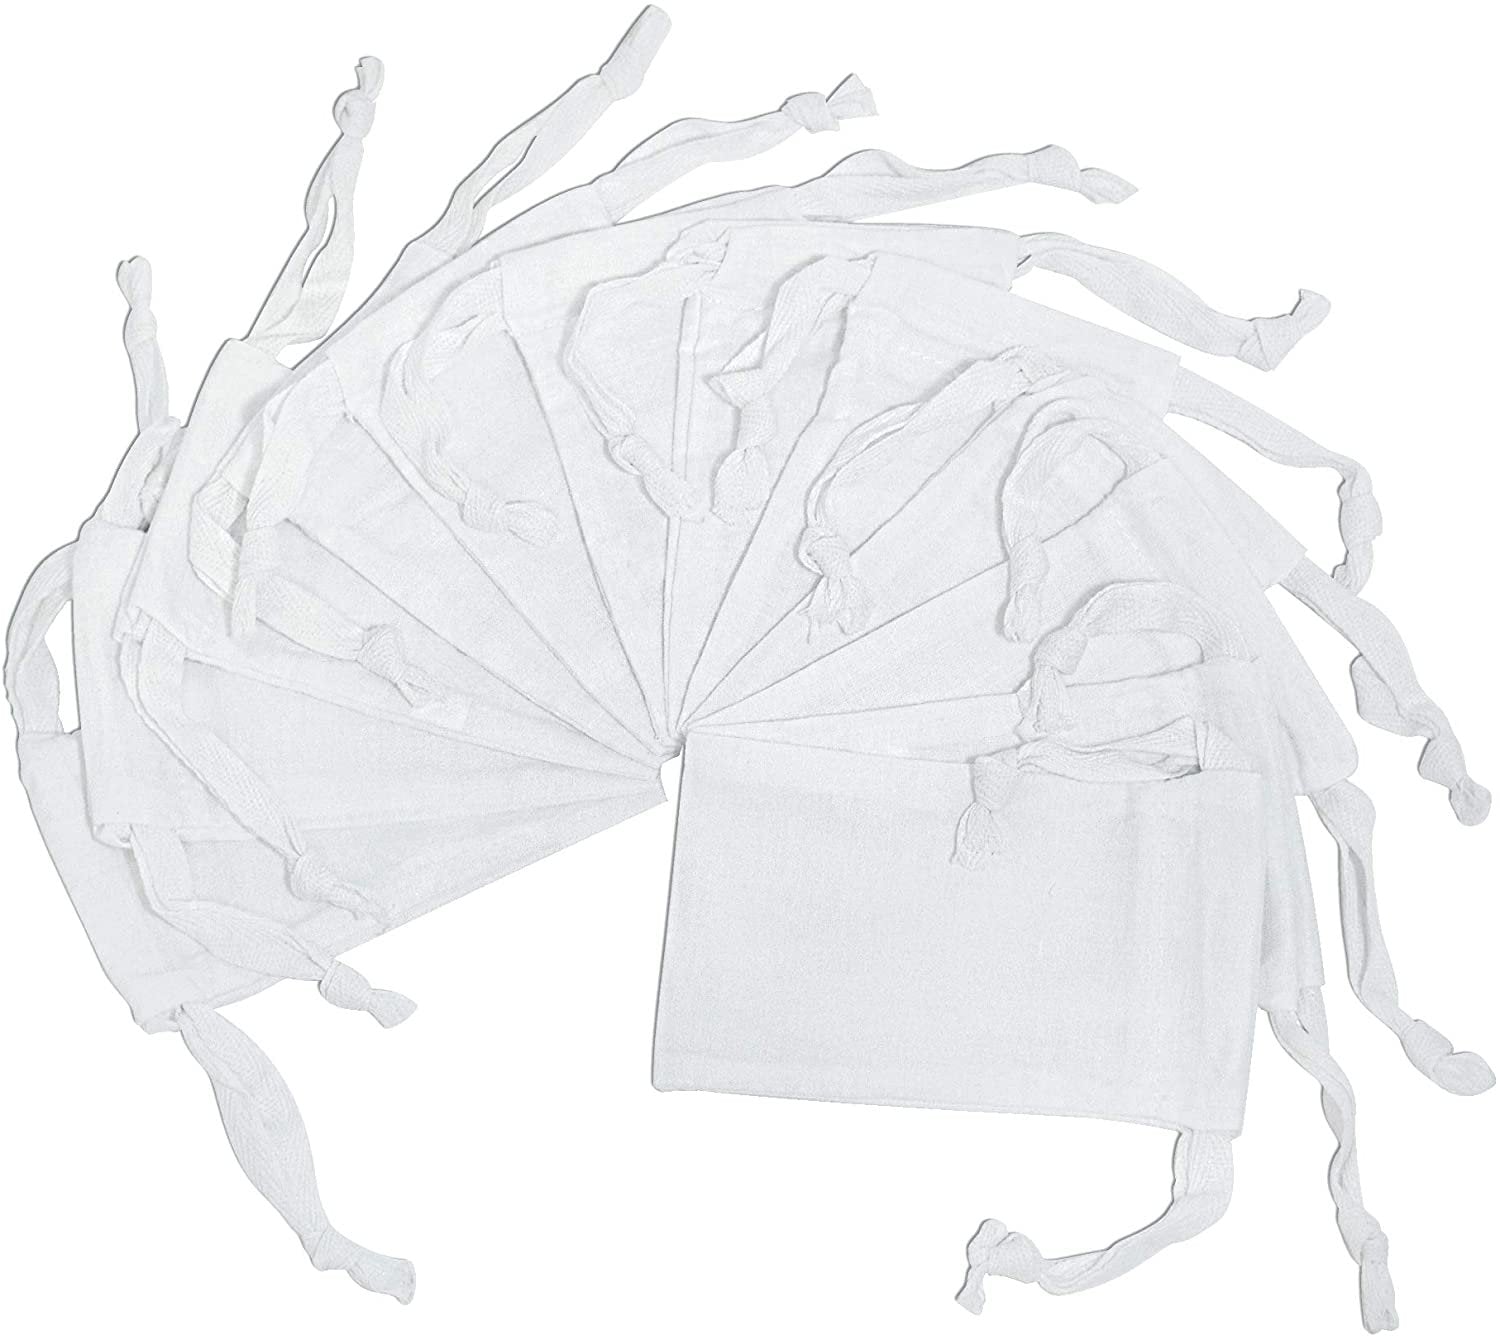 Small Drawstring Bags - 12 Pack 3x5 Inch Small Bright White Muslin Cotton Cloth Pouches in Bulk, Mini Canvas Cloth Fabric Pouch for Jewelry, Gifts, Candy, Parties, Wedding Favors, Soaps, Treats, Crafts